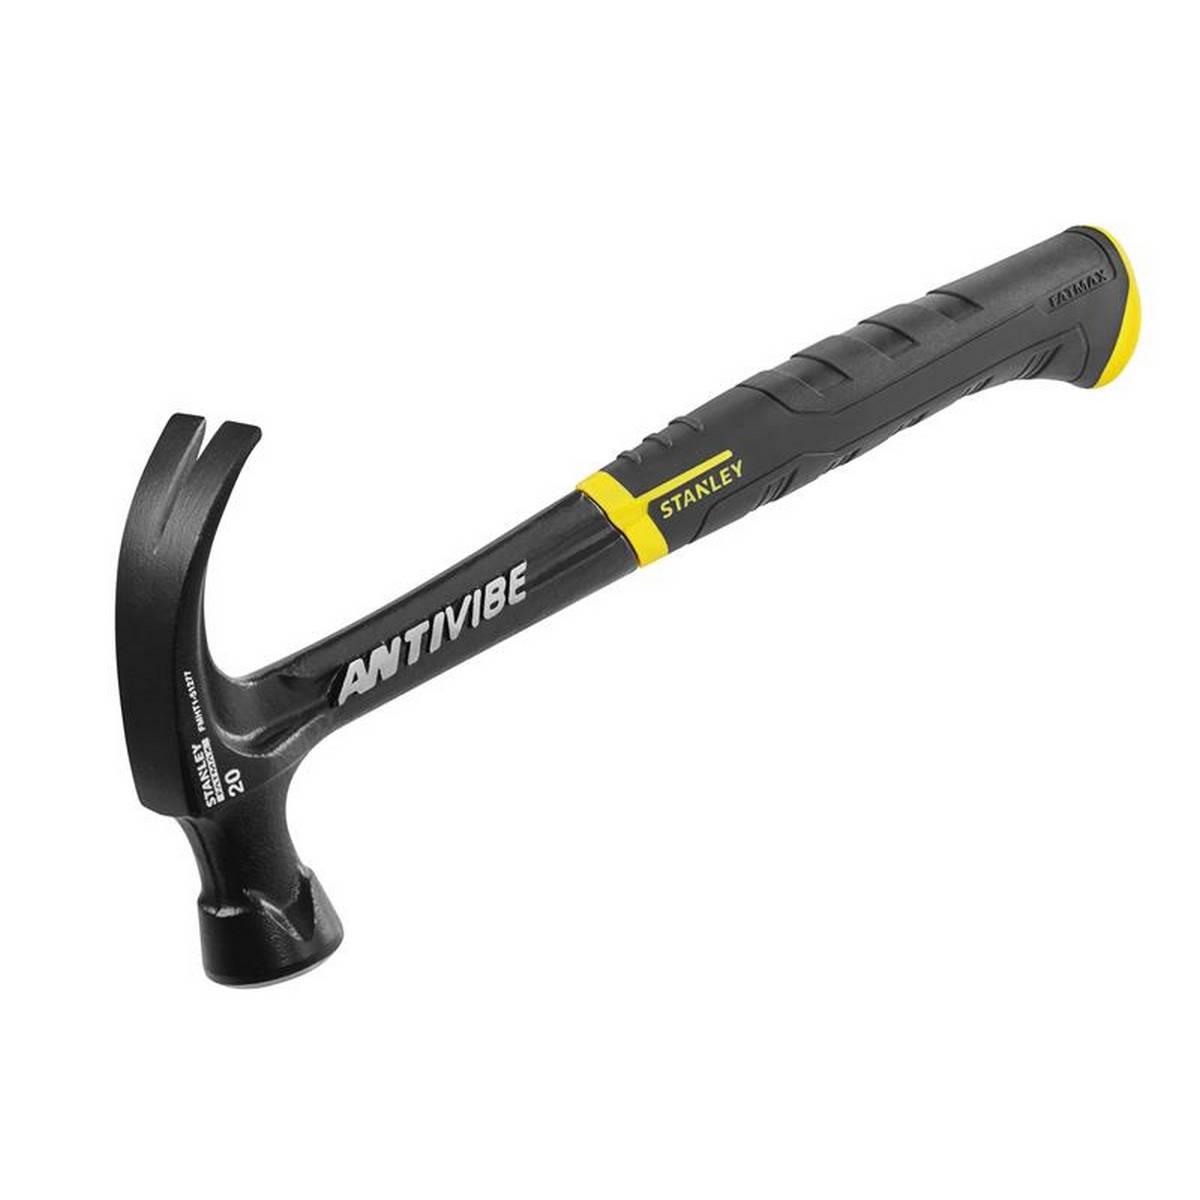 STANLEY® FatMax® AntiVibe All Steel Curved Claw Hammer 570g (20oz)